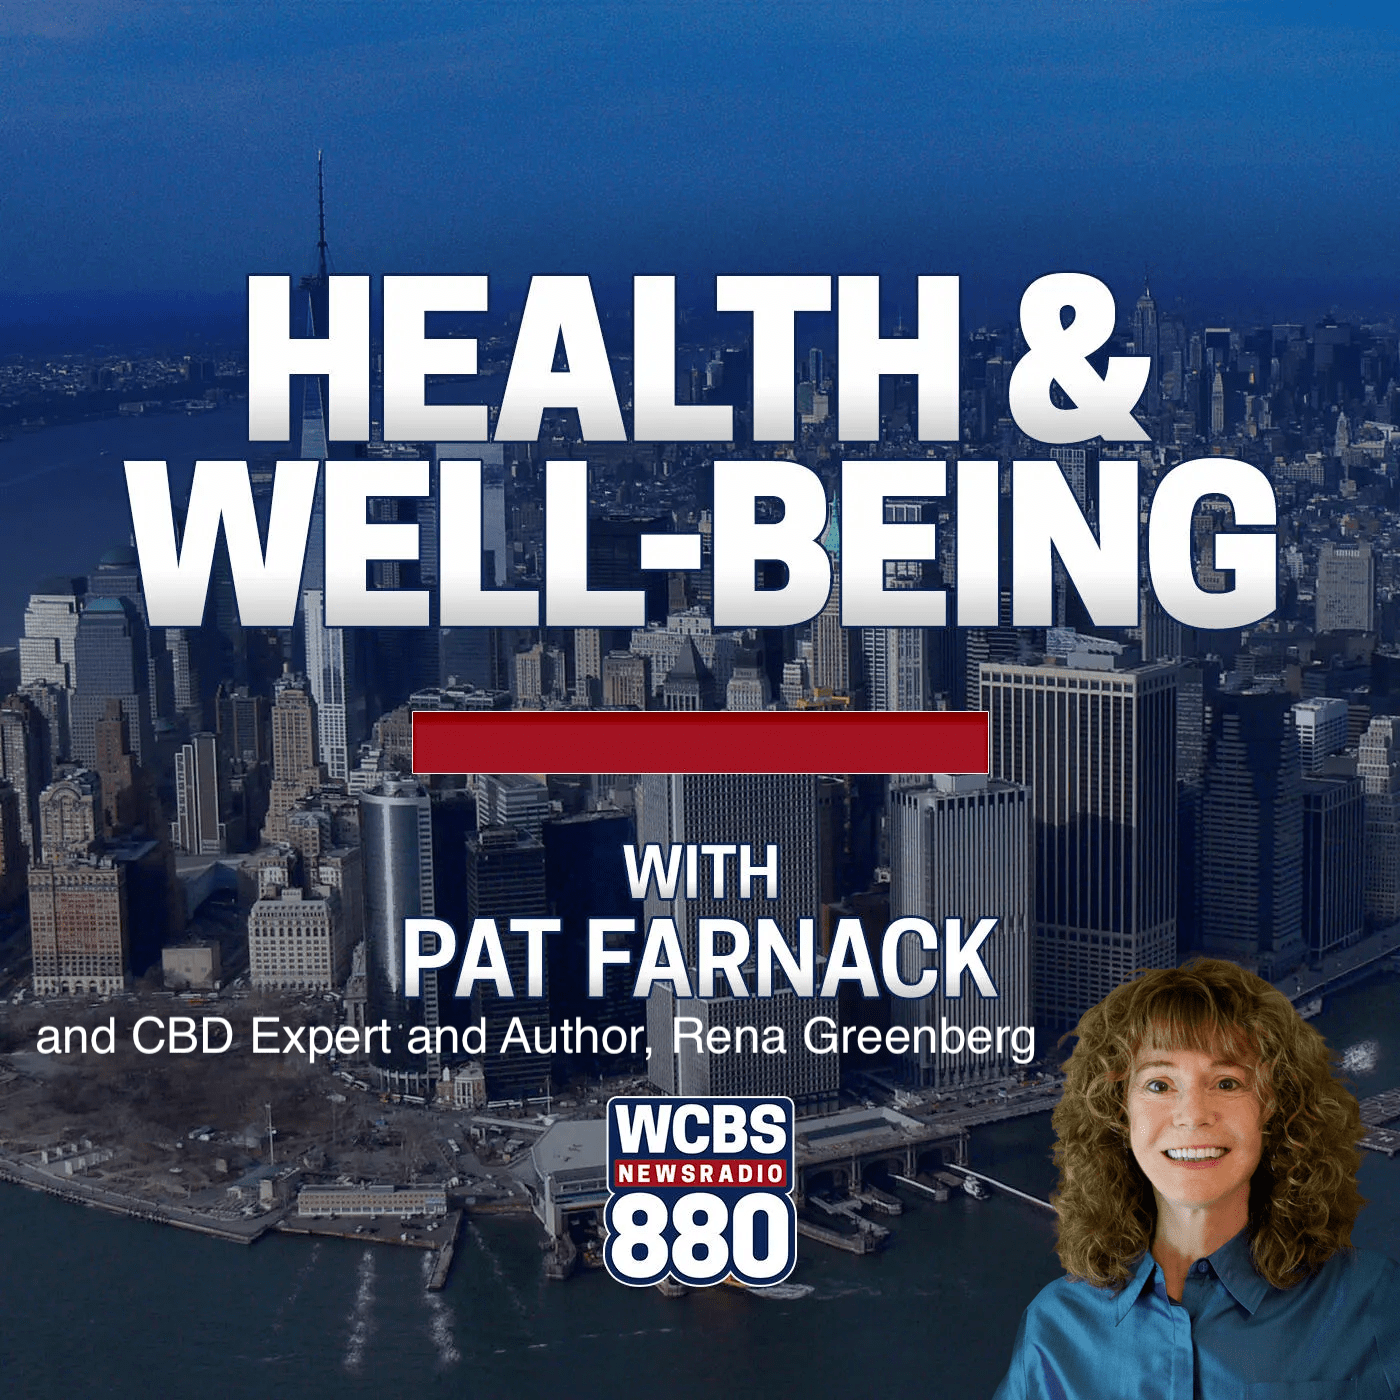 Health and wellbeing with Pat Farnack and Rena Greenberg